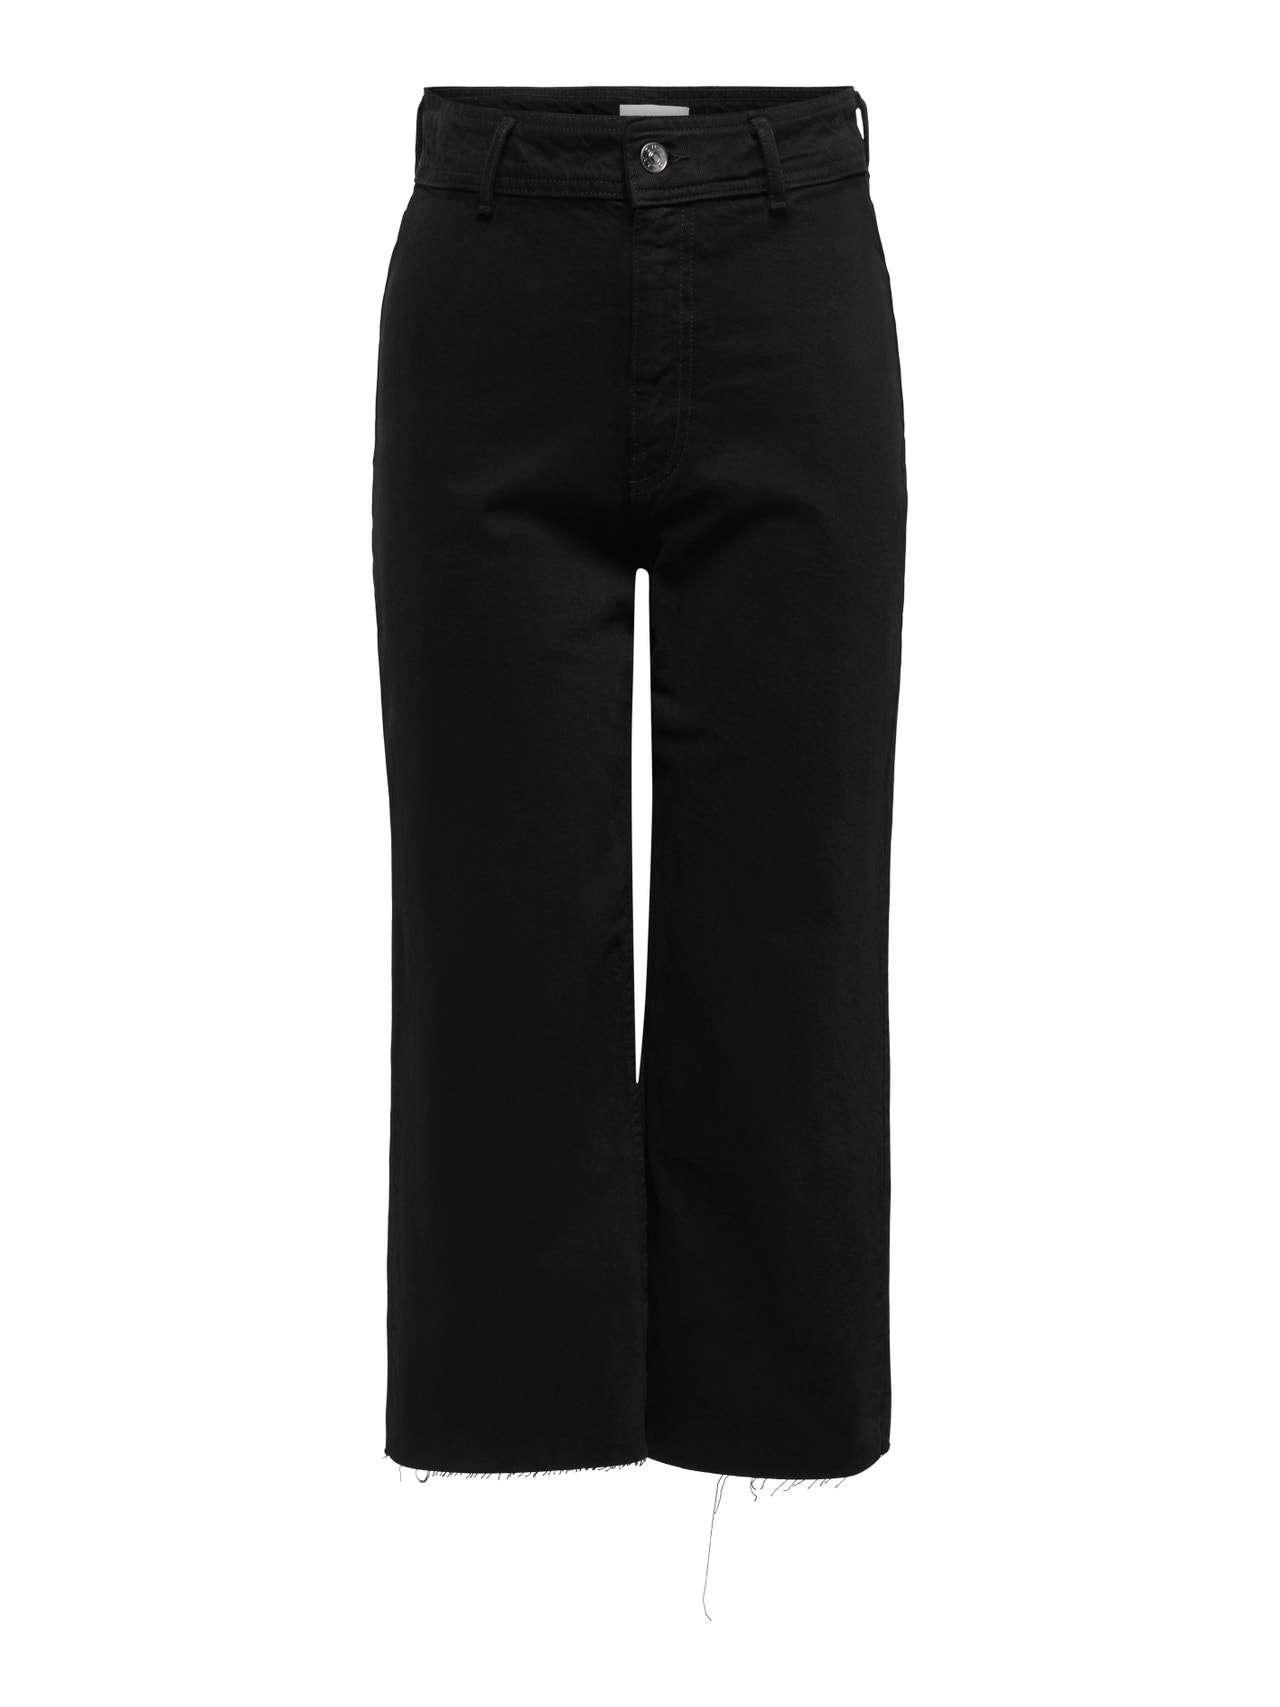 ONLY Gerade geschnitten Hohe Taille Jeans -Black - 15253400